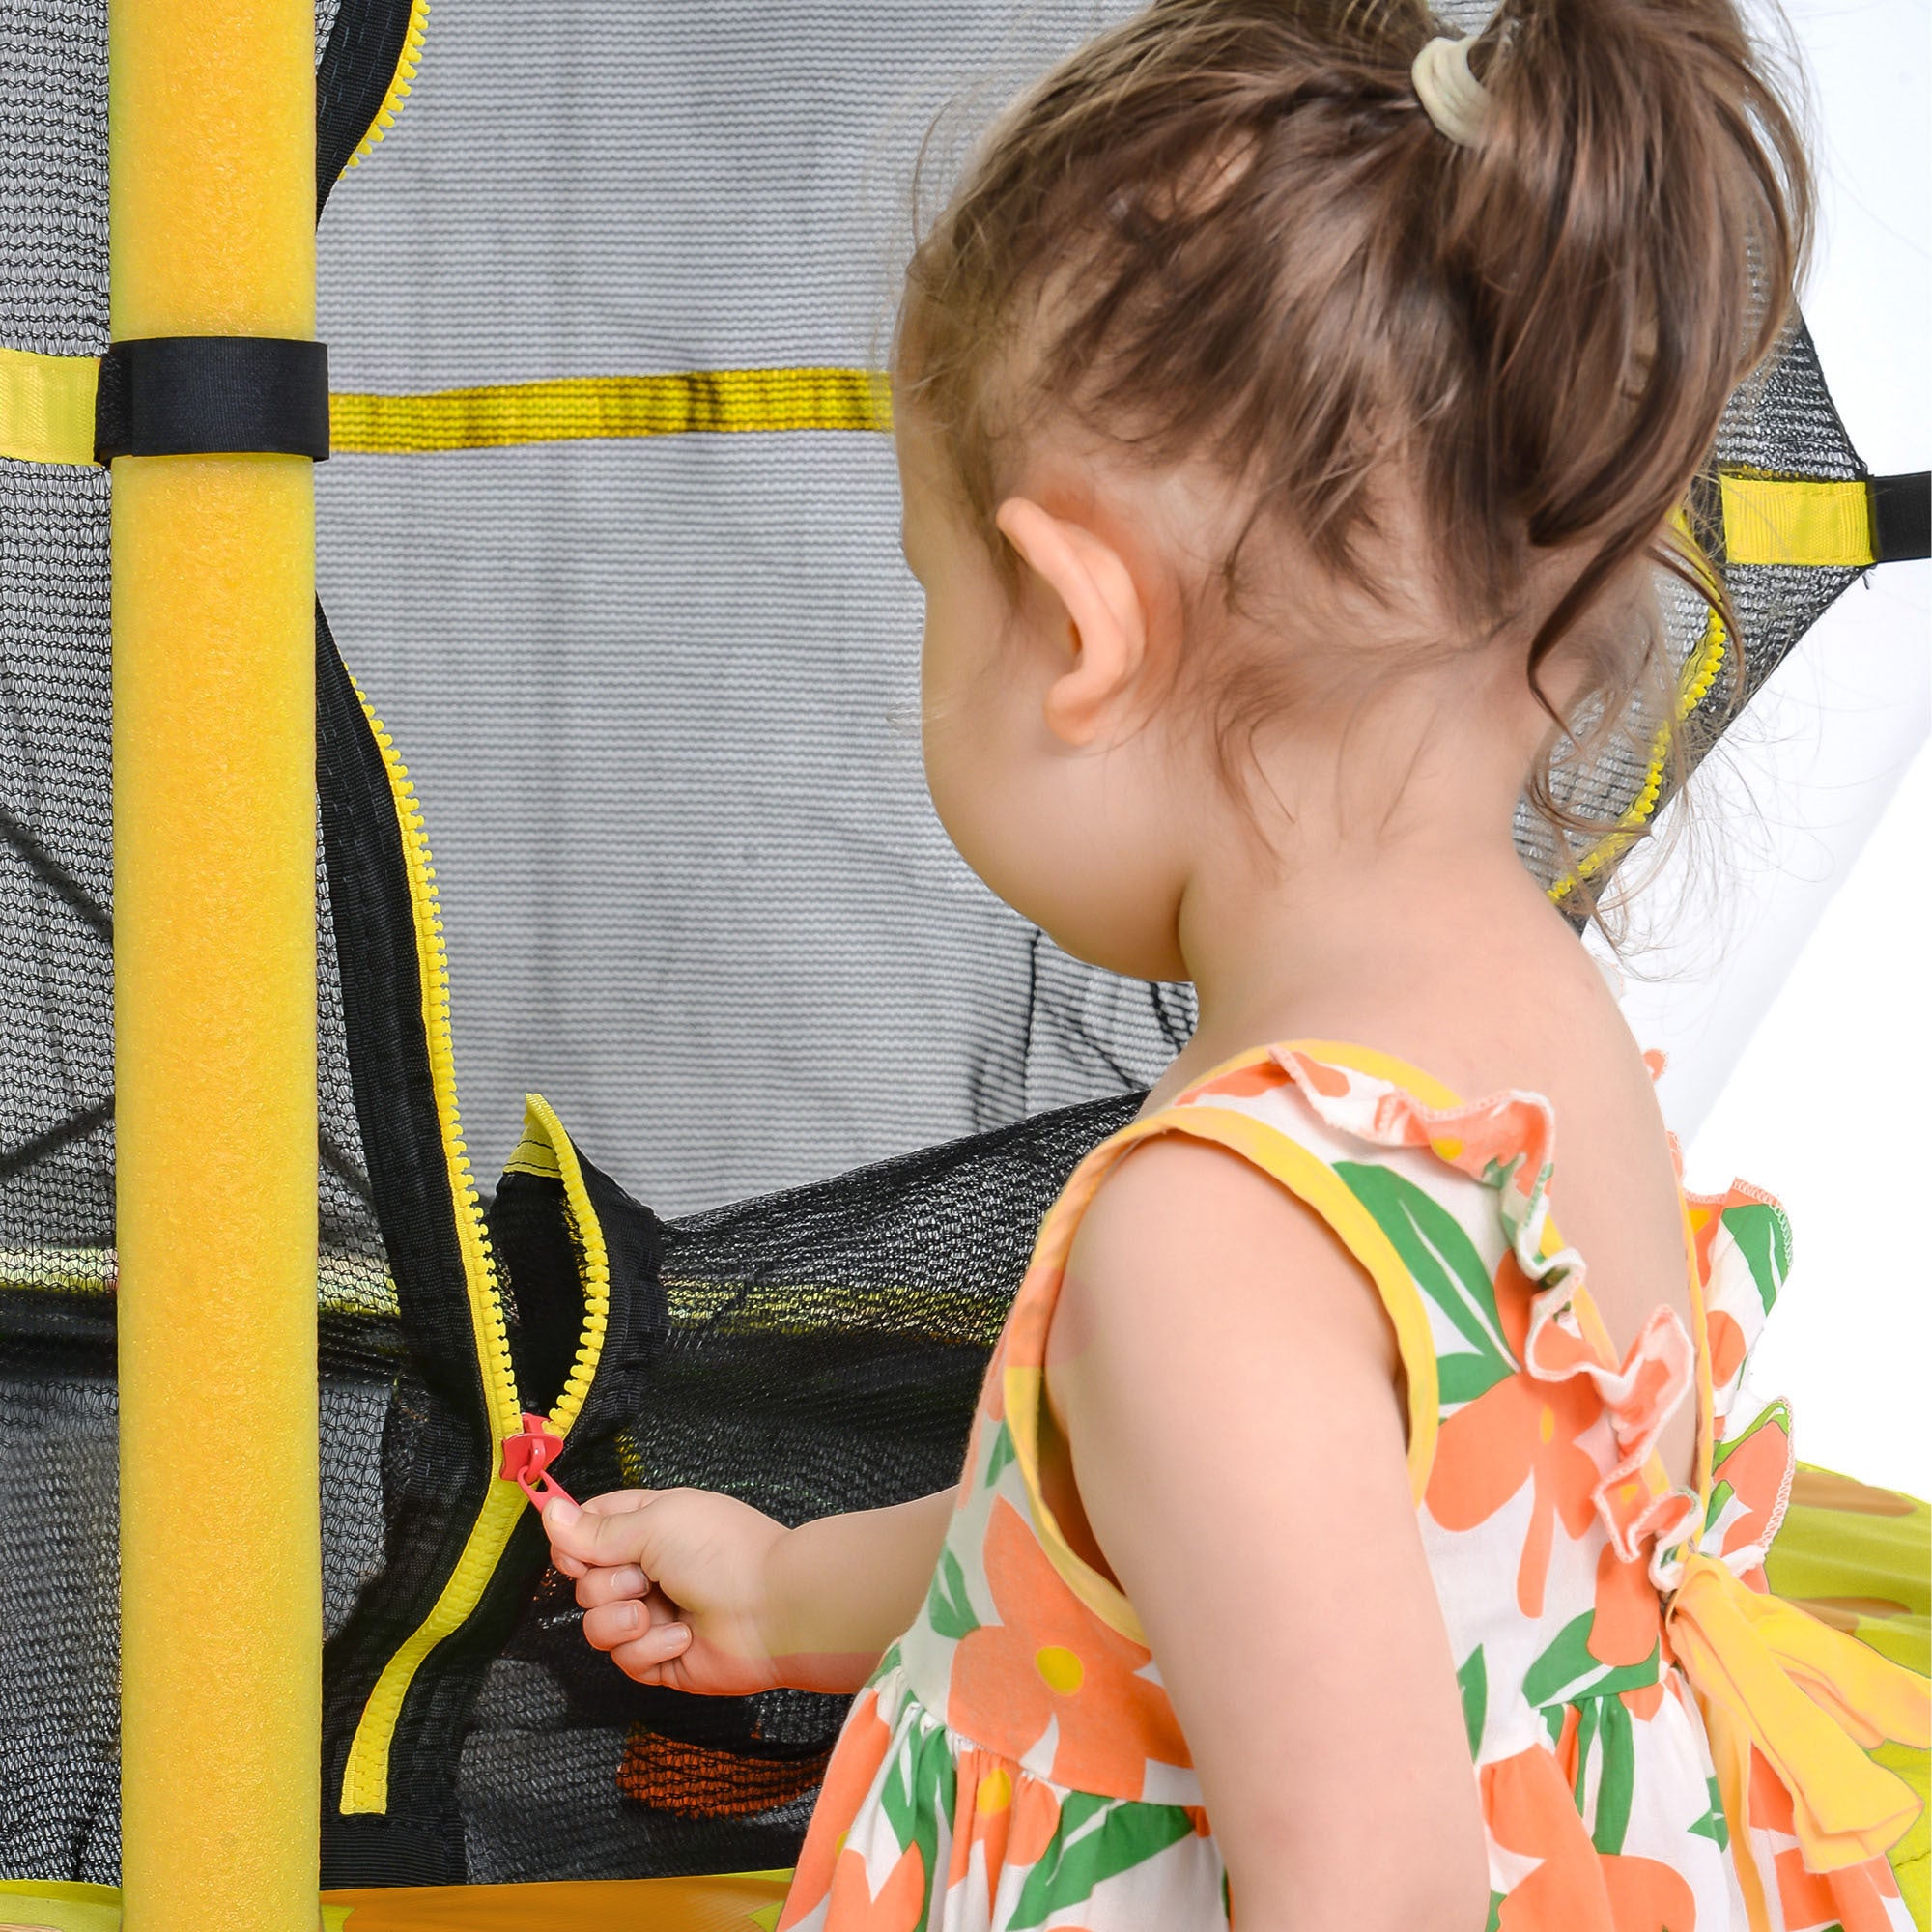 🆓🚛 55" Kids Trampoline With Safety Enclosure Net, 4.5Ft Outdoor Indoor Trampoline for Kids, Yellow